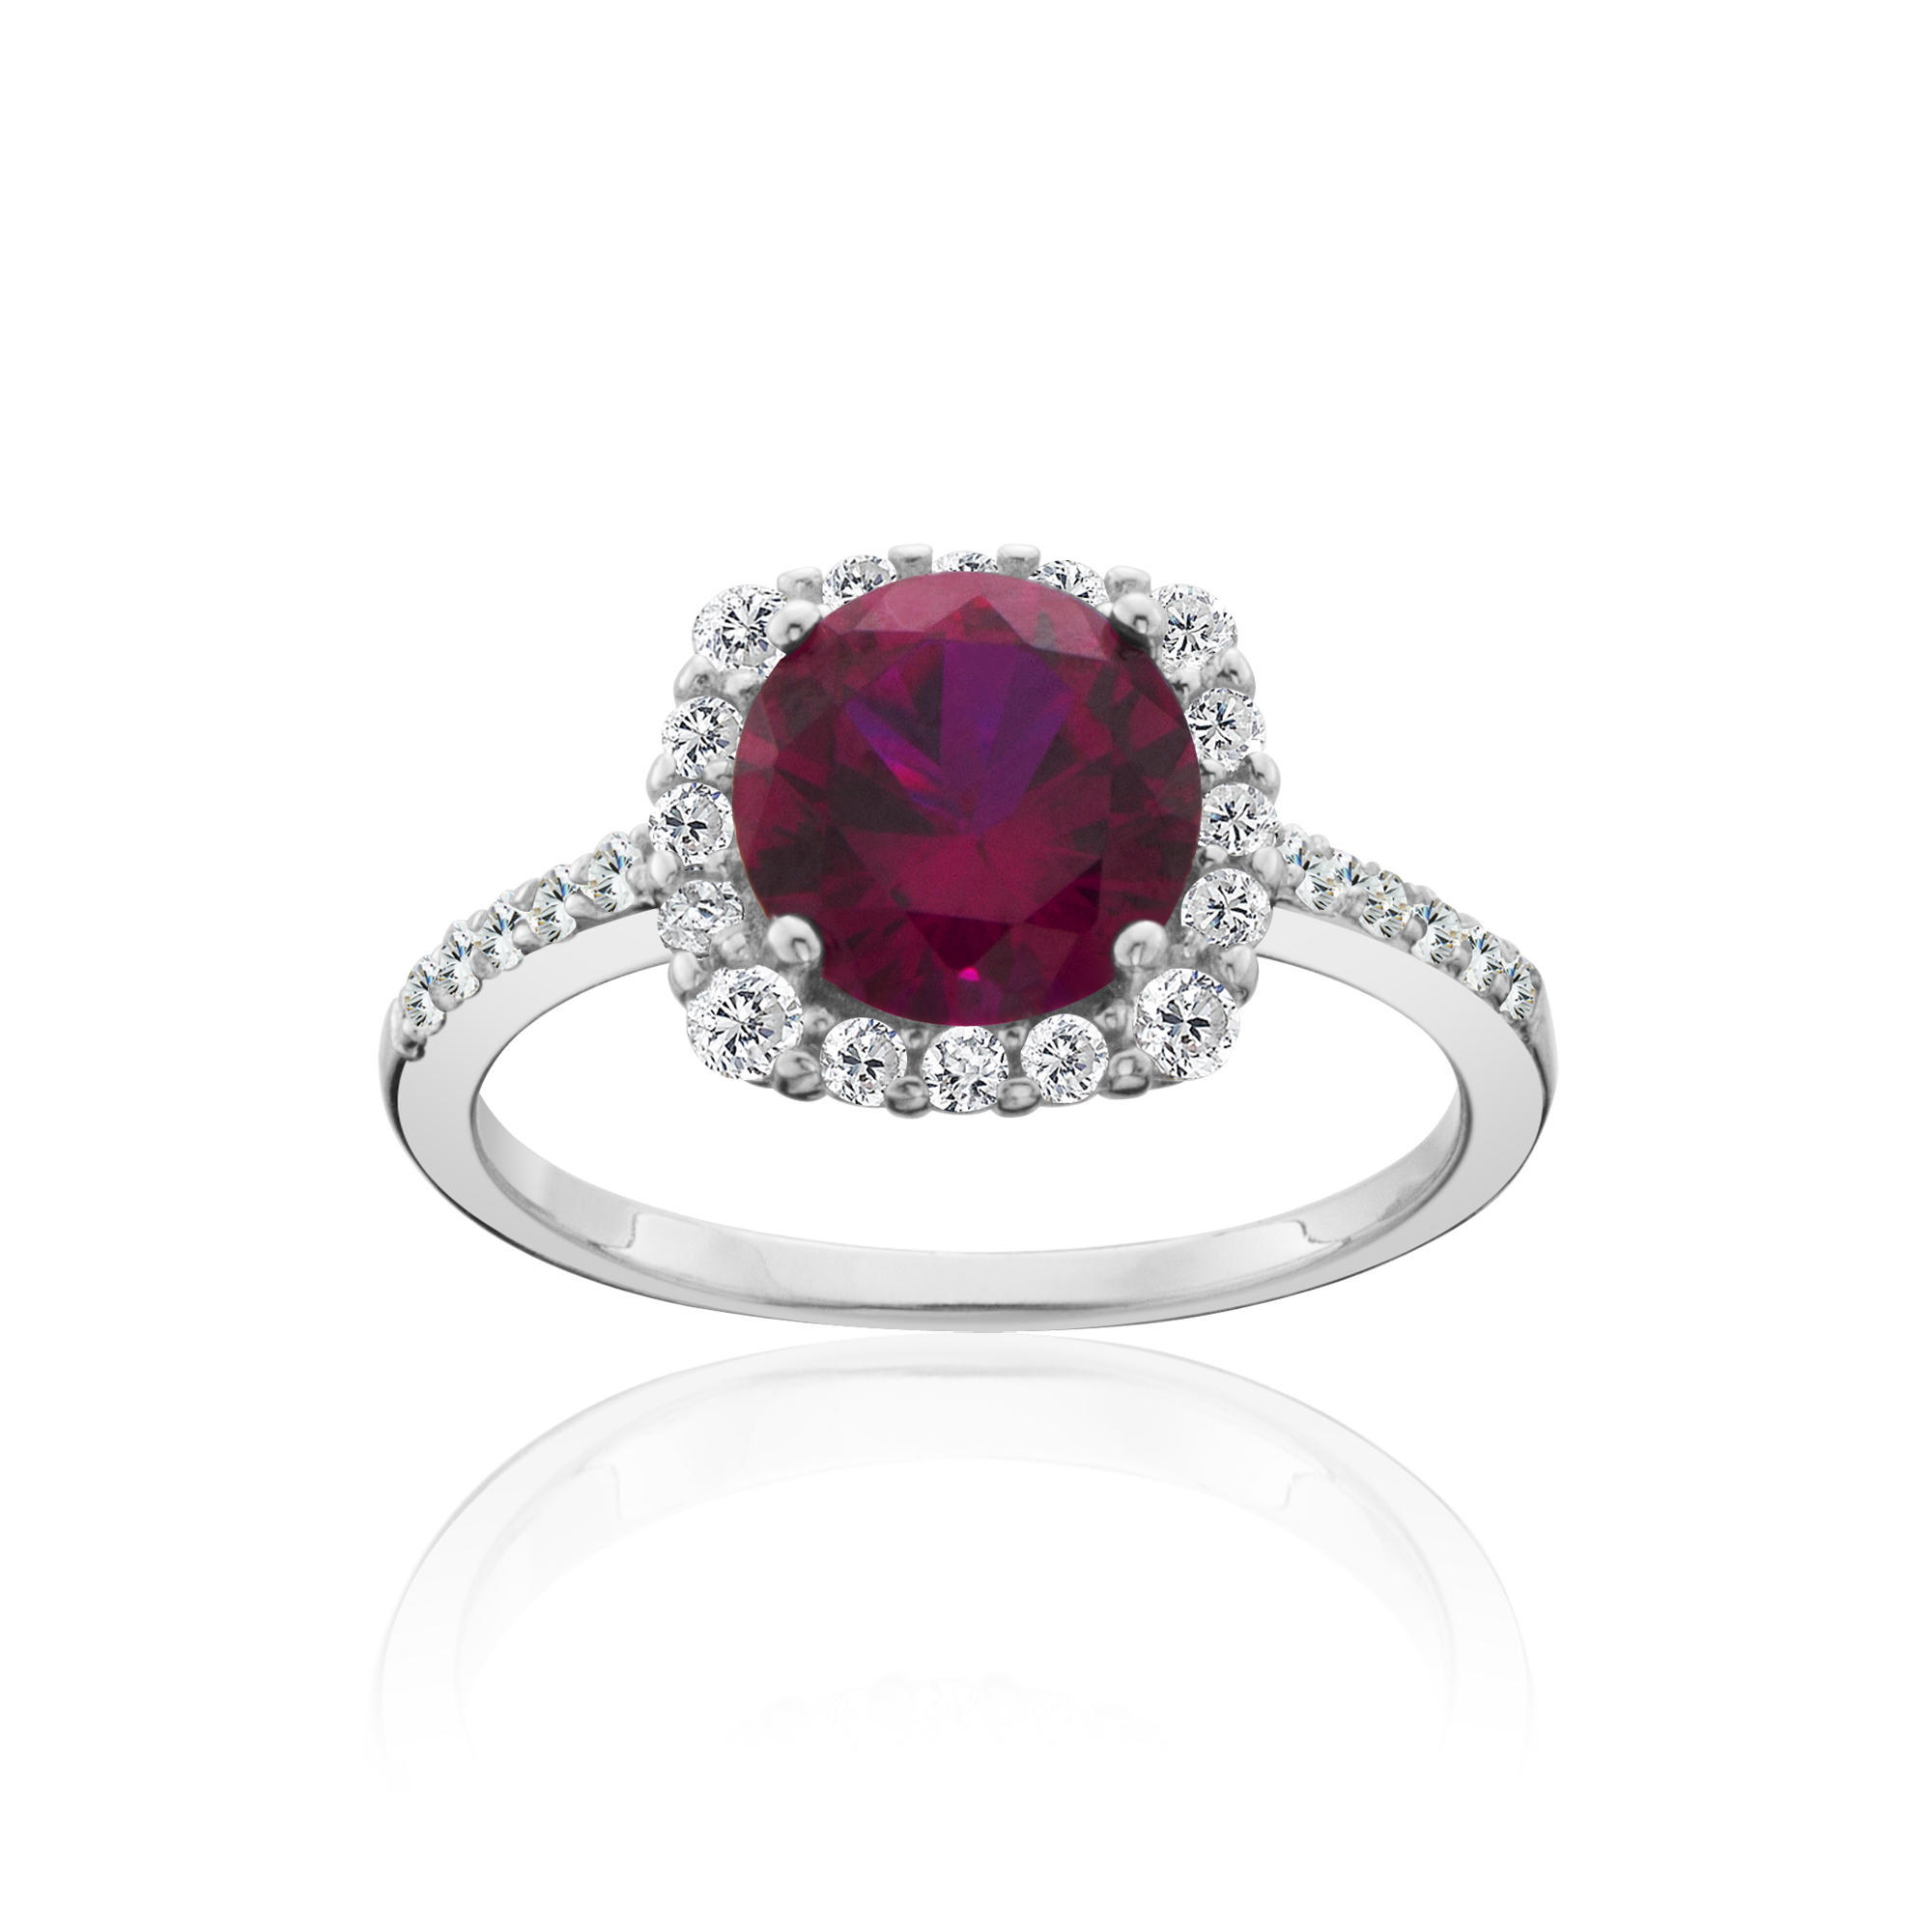 Halo Style Round Cut Created Ruby Ring Sterling Silver